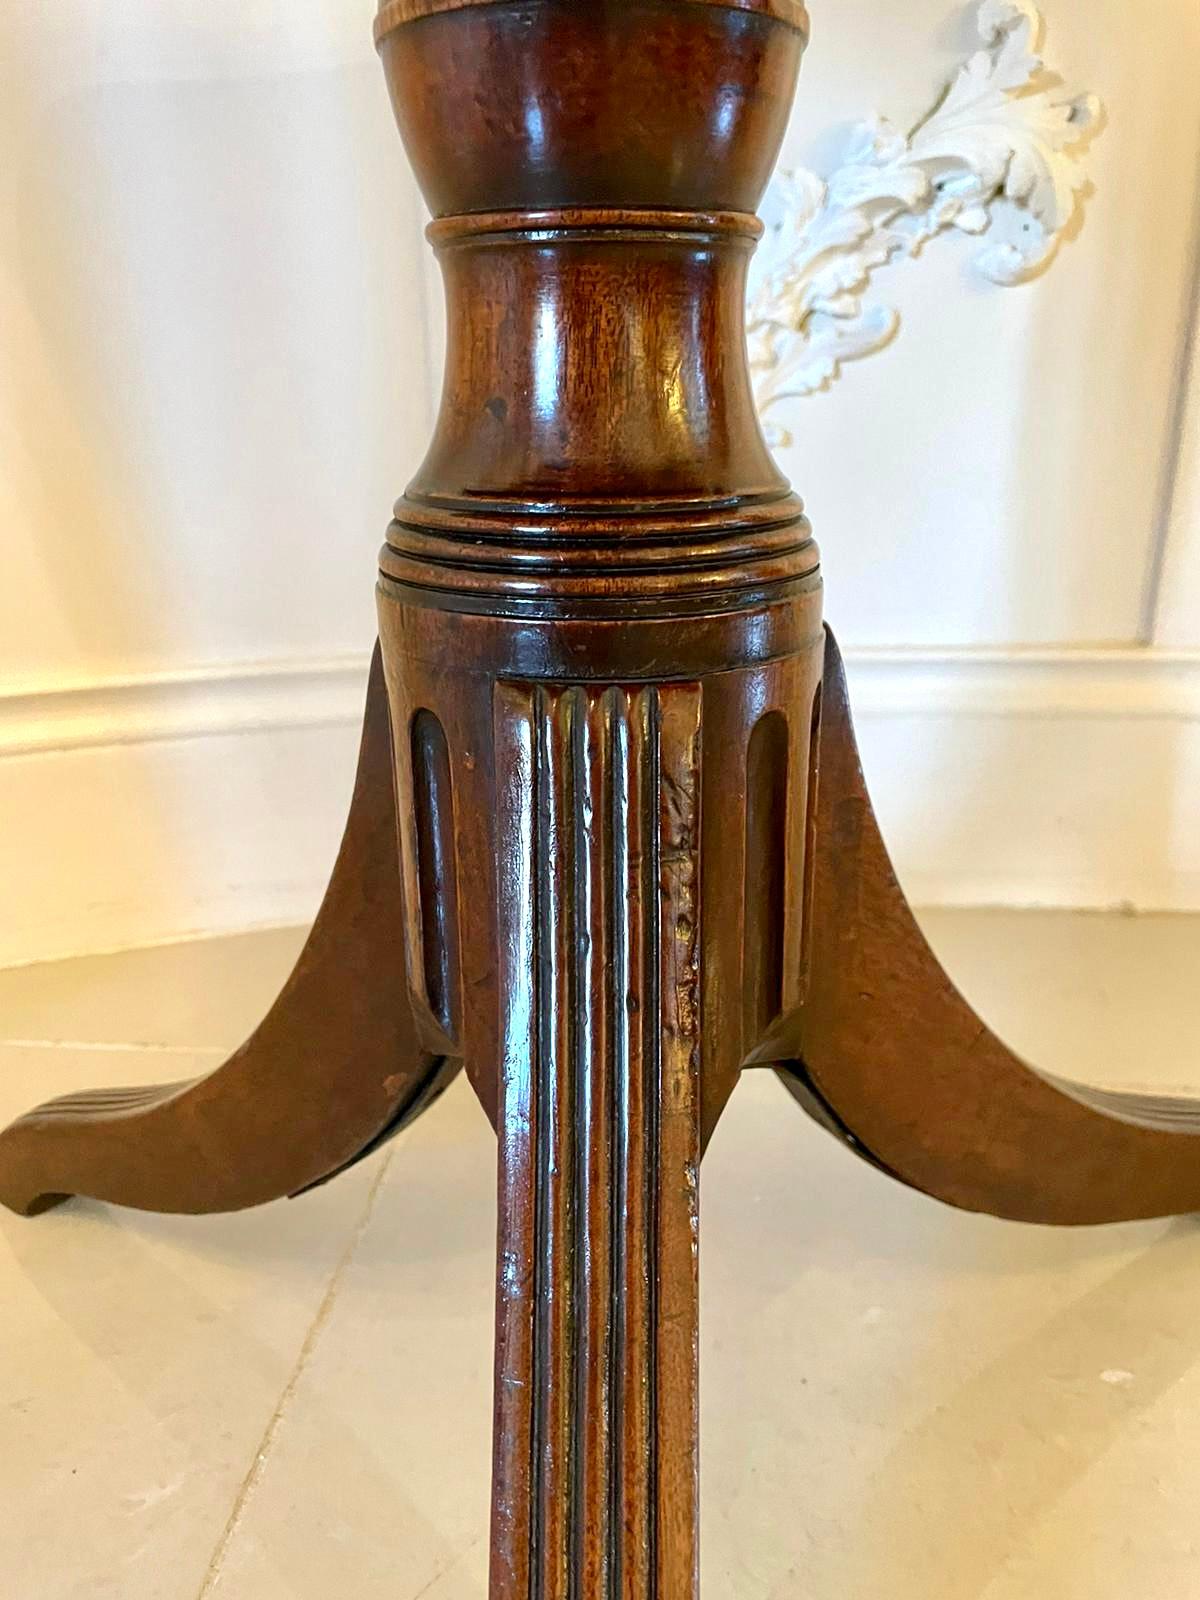 Antique mahogany Regency tripod table having a quality mahogany tilting top with a reeded edge supported by a shaped turned column standing on shaped spaded legs.

A splendid example having a wonderful colour and patina and in original